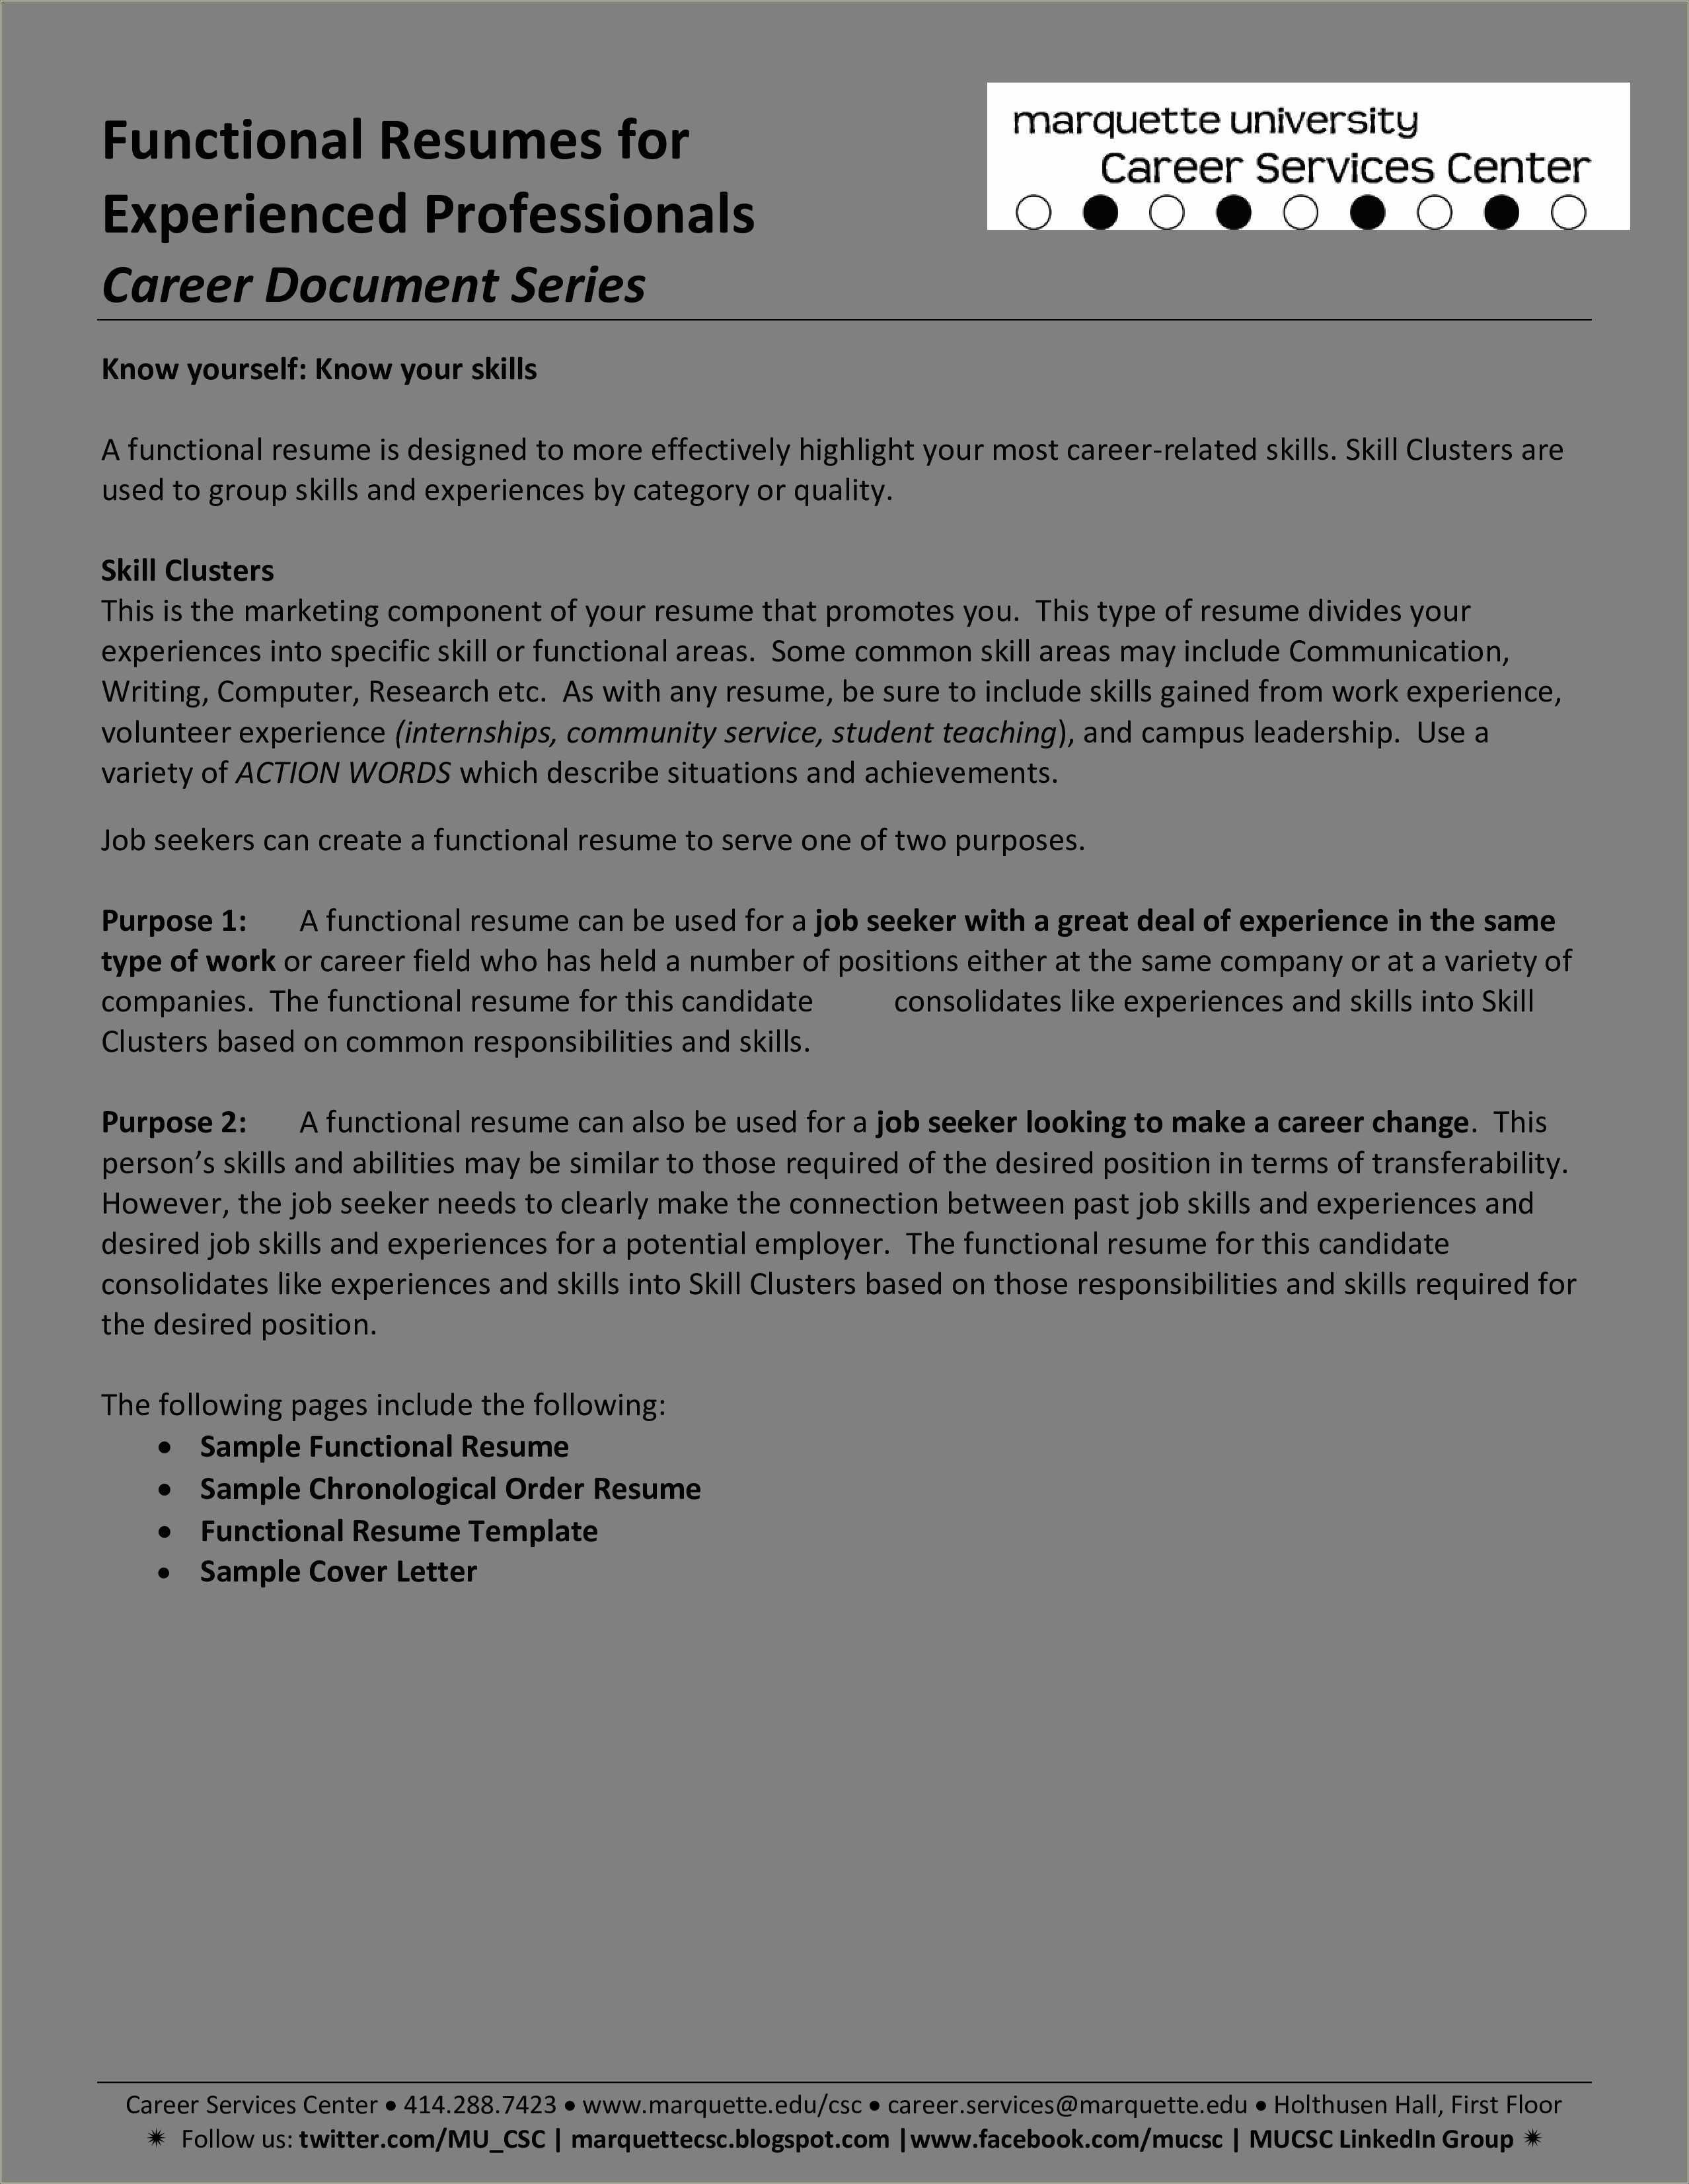 functional-executive-resume-template-free-resume-example-gallery